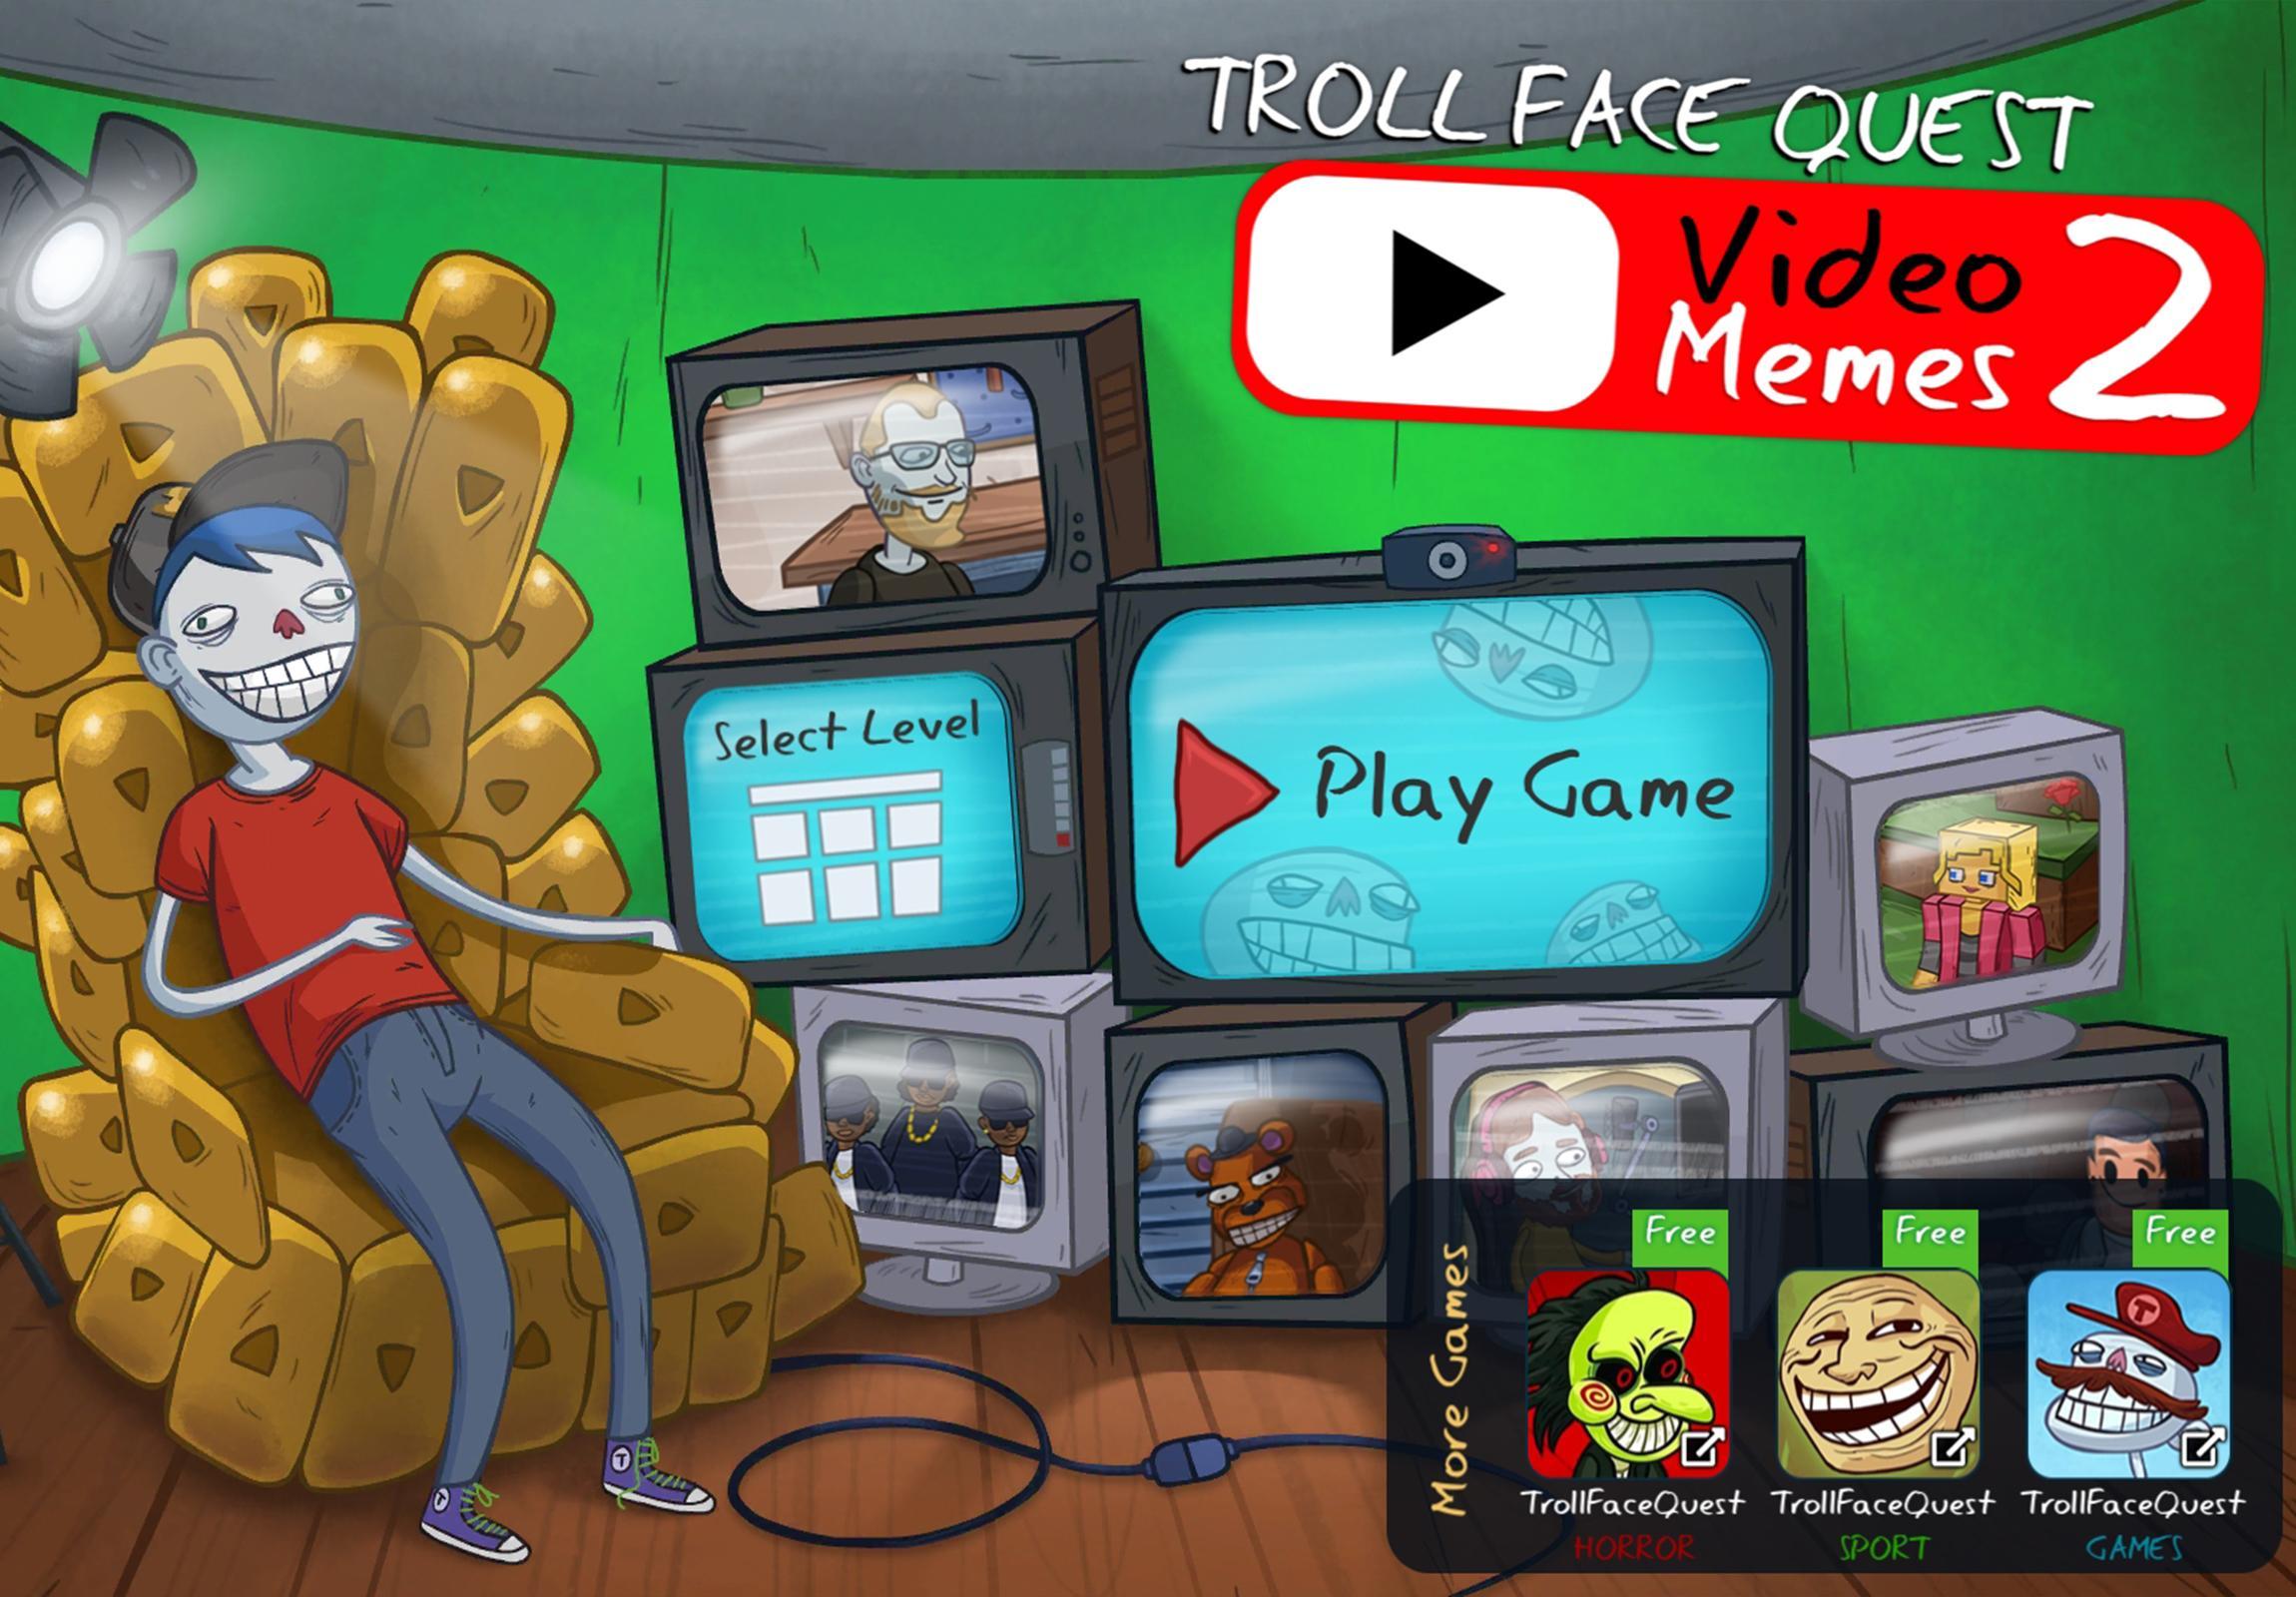 Troll Face Quest: Horror 2 - Download & Play for Free Here